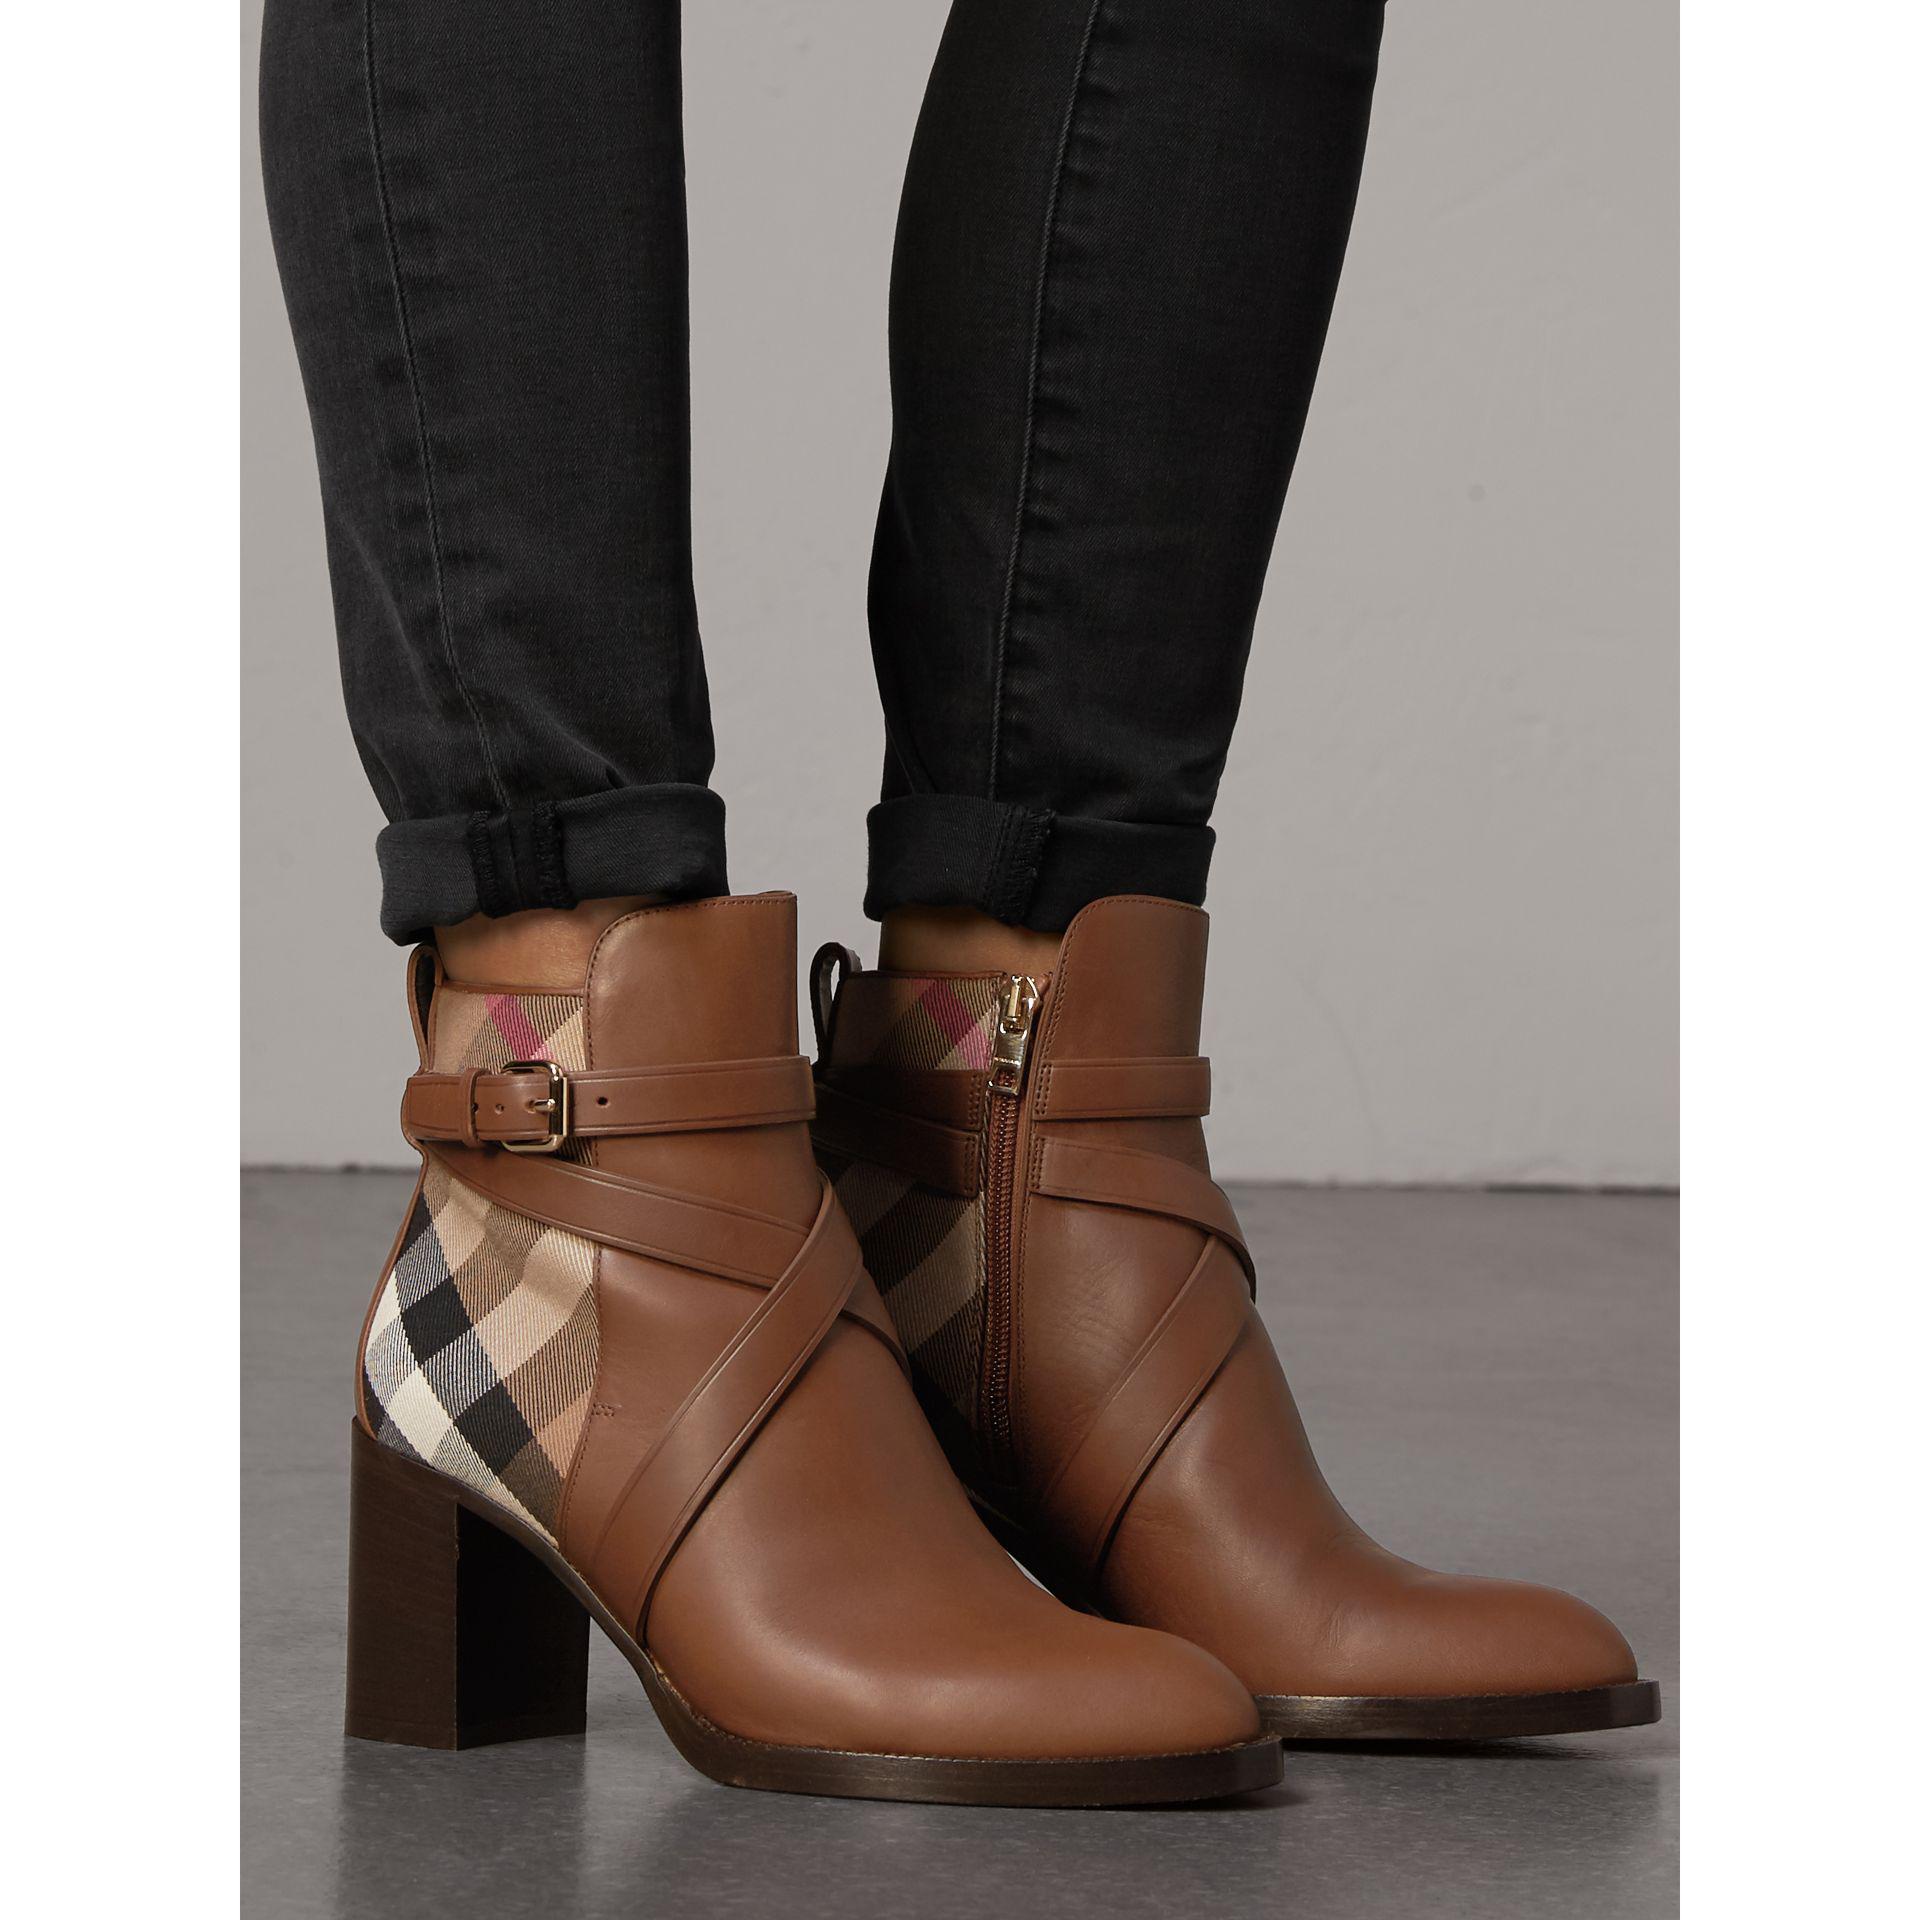 burberry house check ankle boots